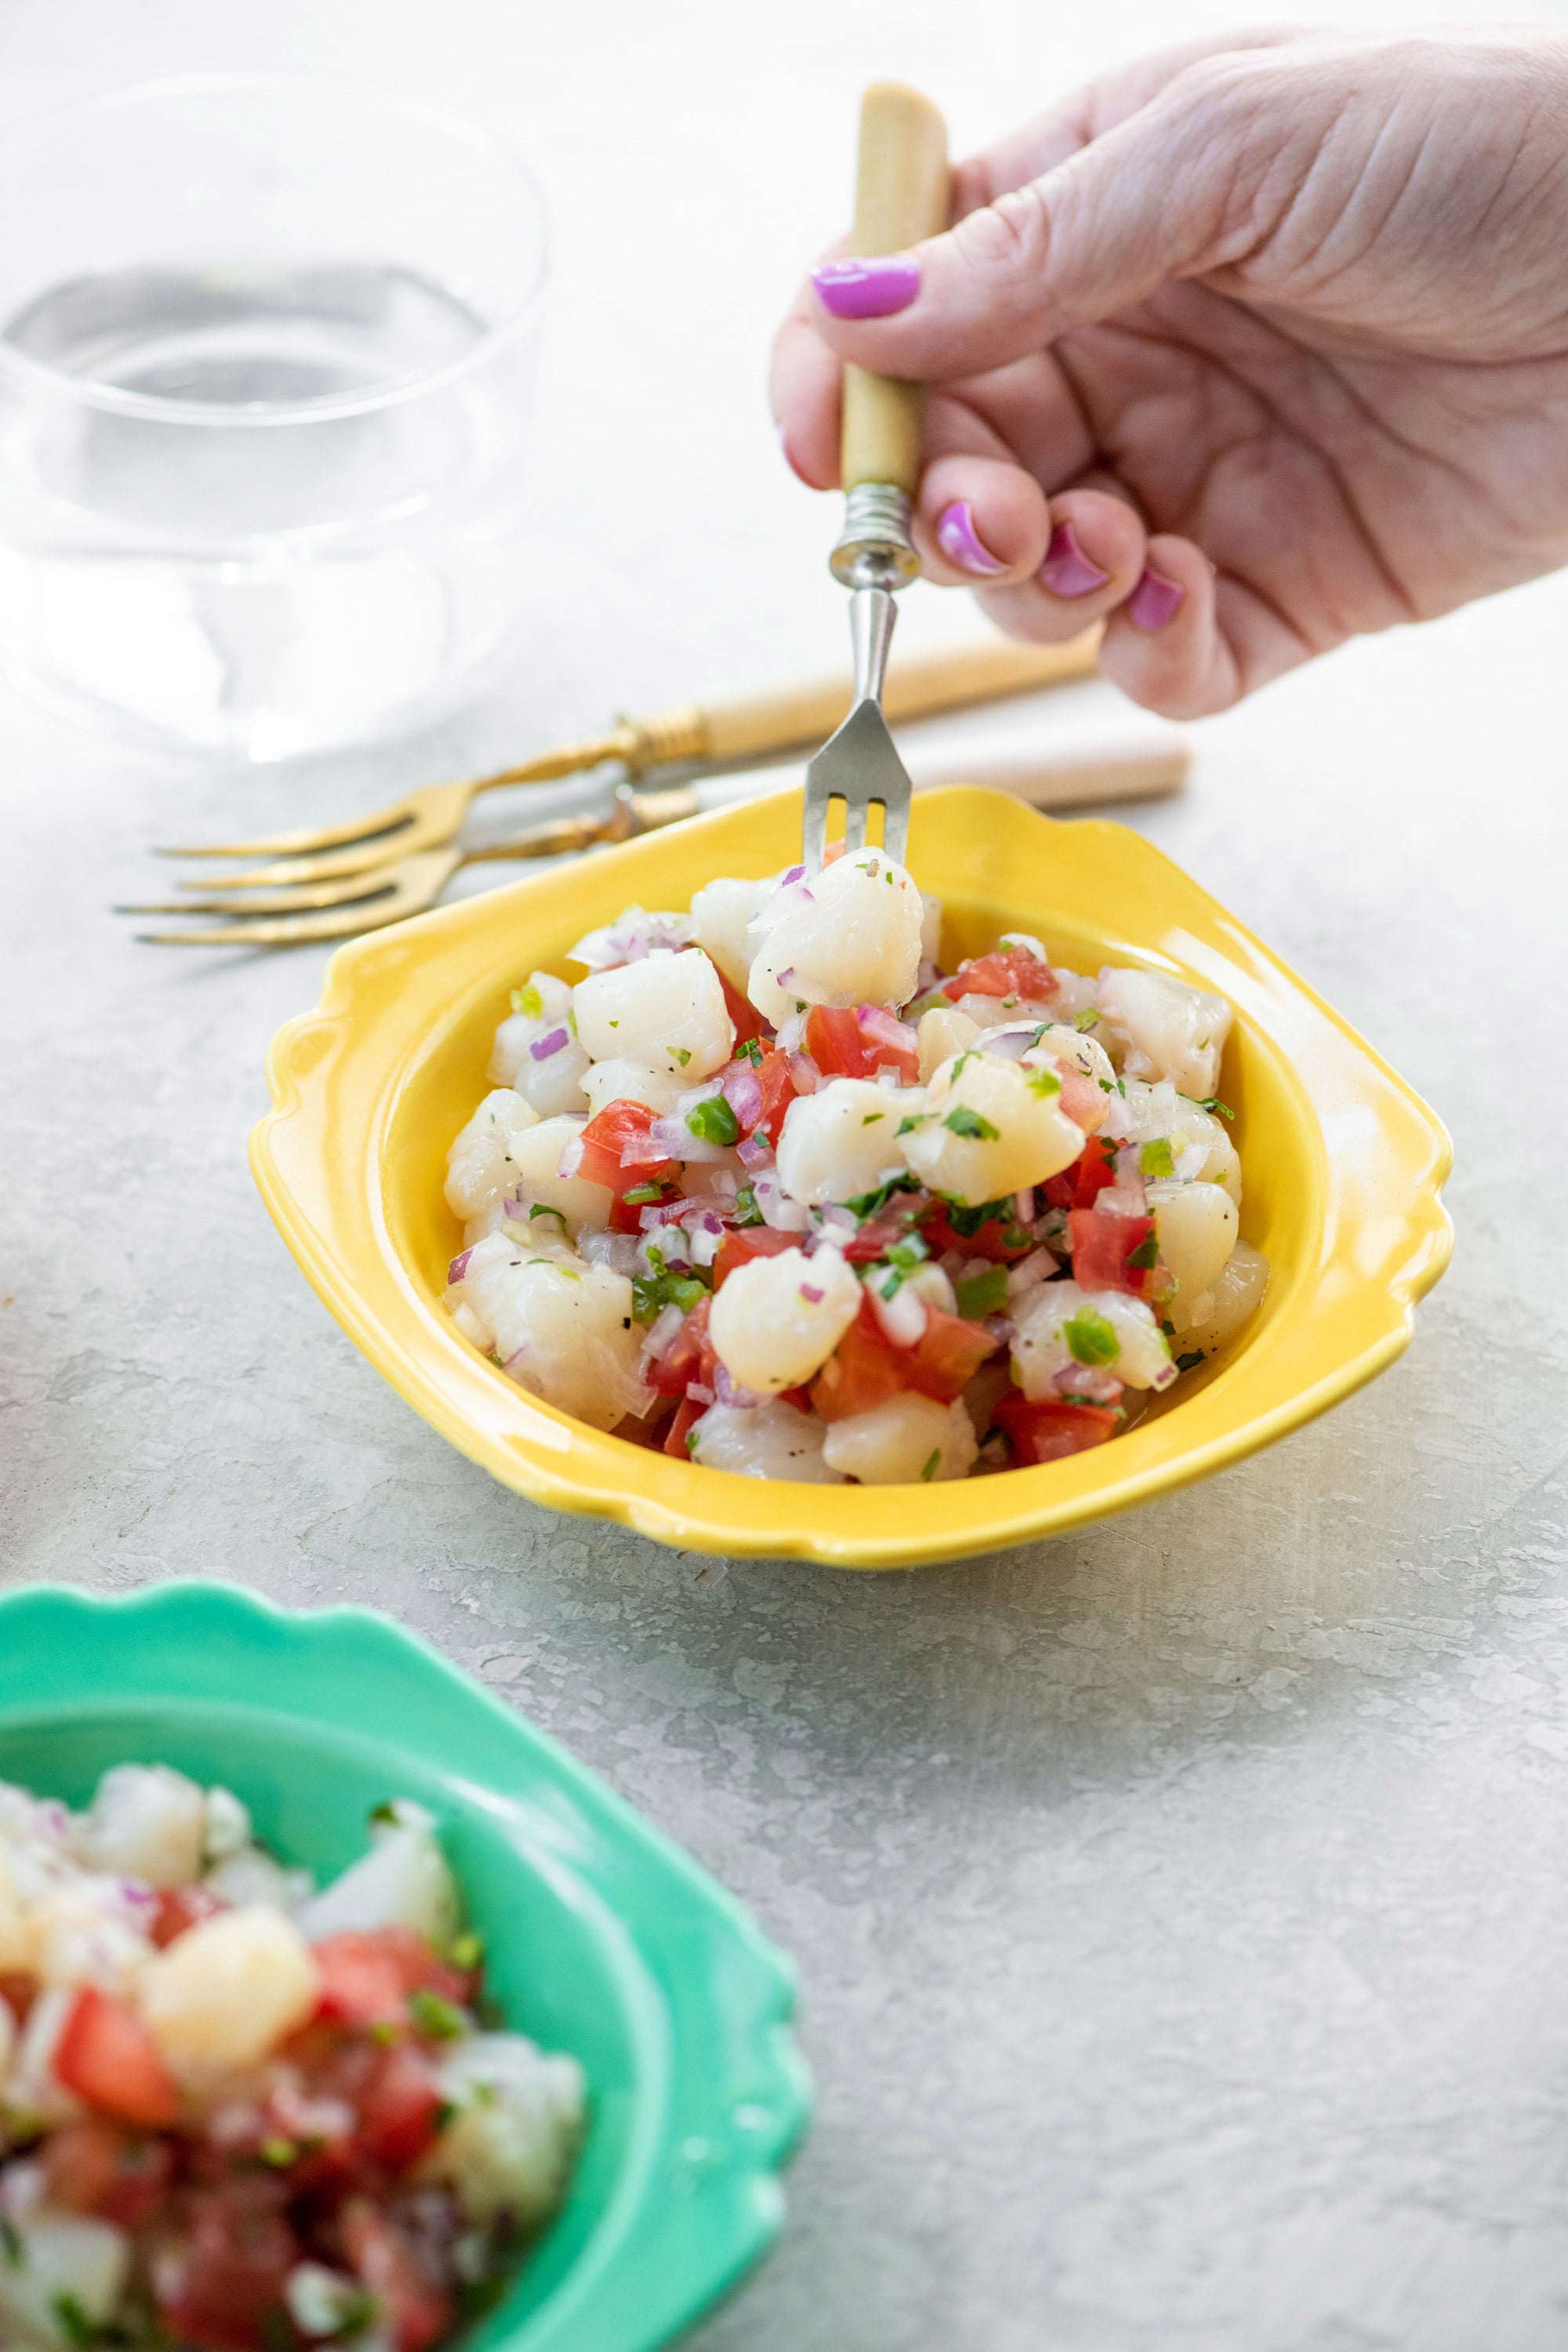 Woman scooping scallop ceviche from yellow bowl.